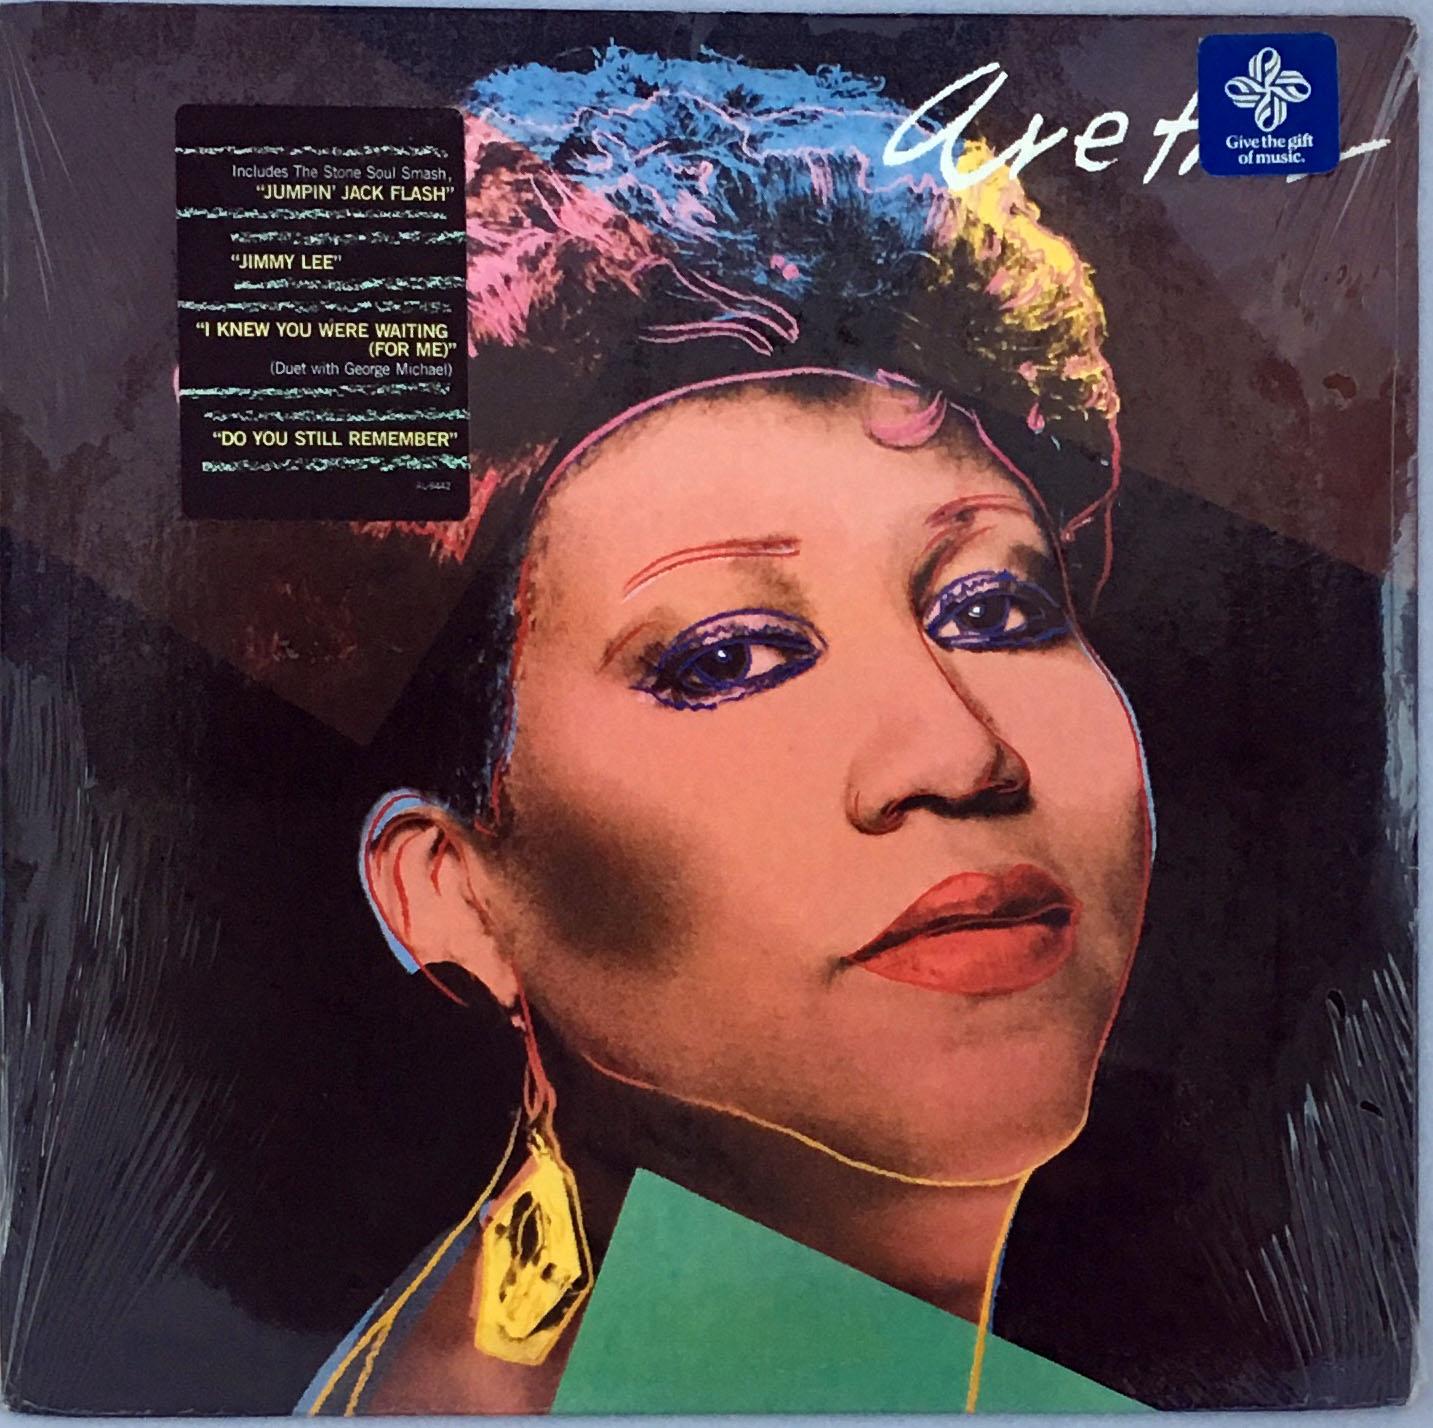 Andy Warhol, Aretha Franklin 1986
Sought-after Aretha Franklin record art illustrated and designed by Andy Warhol. A rare example, new and unopened in its original packaging. 
Offset illustrated by Andy Warhol shortly before his death in 1986.